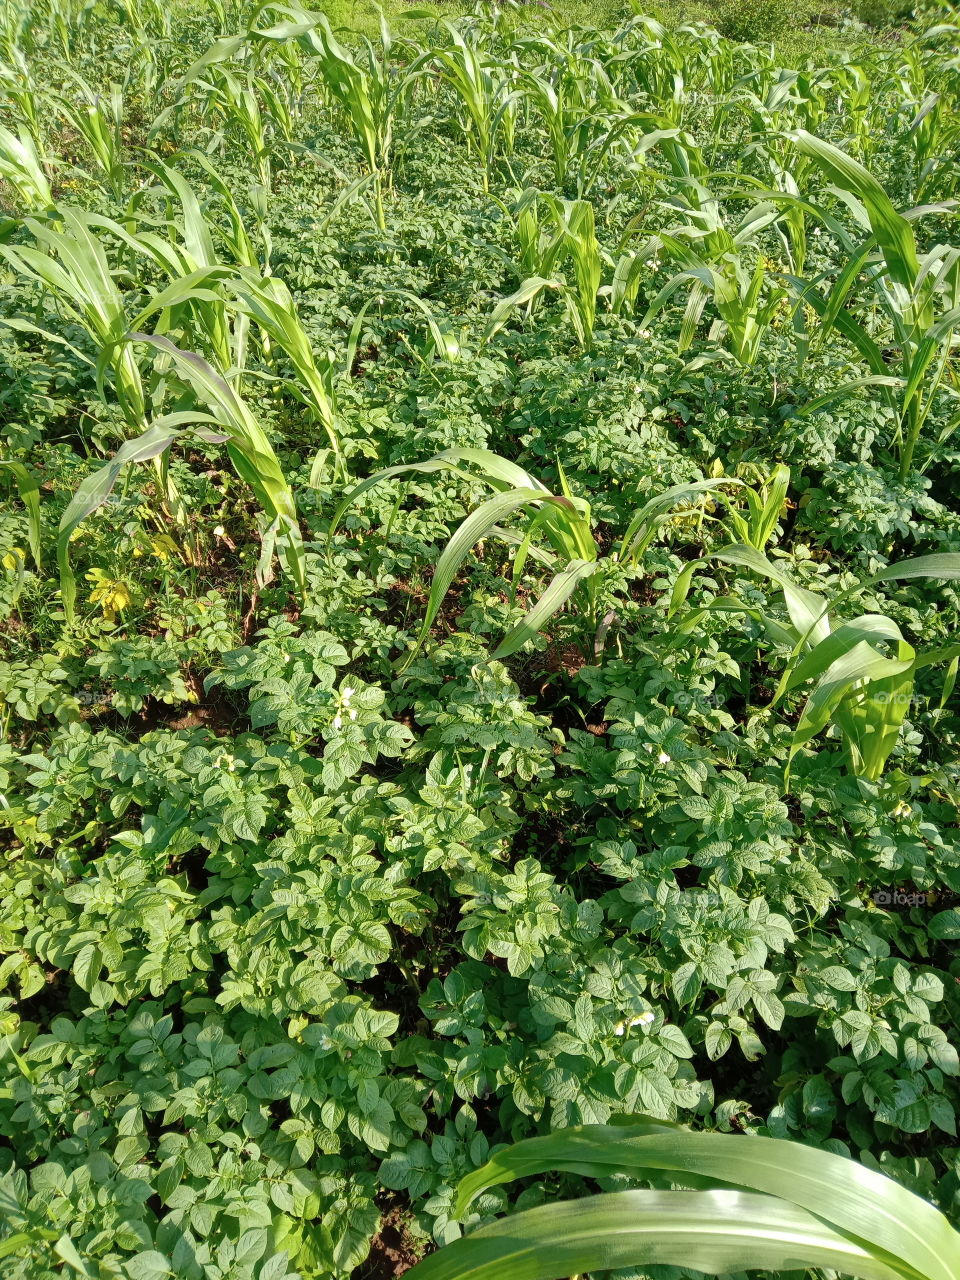 potato farming in North East India in the state of meghalaya